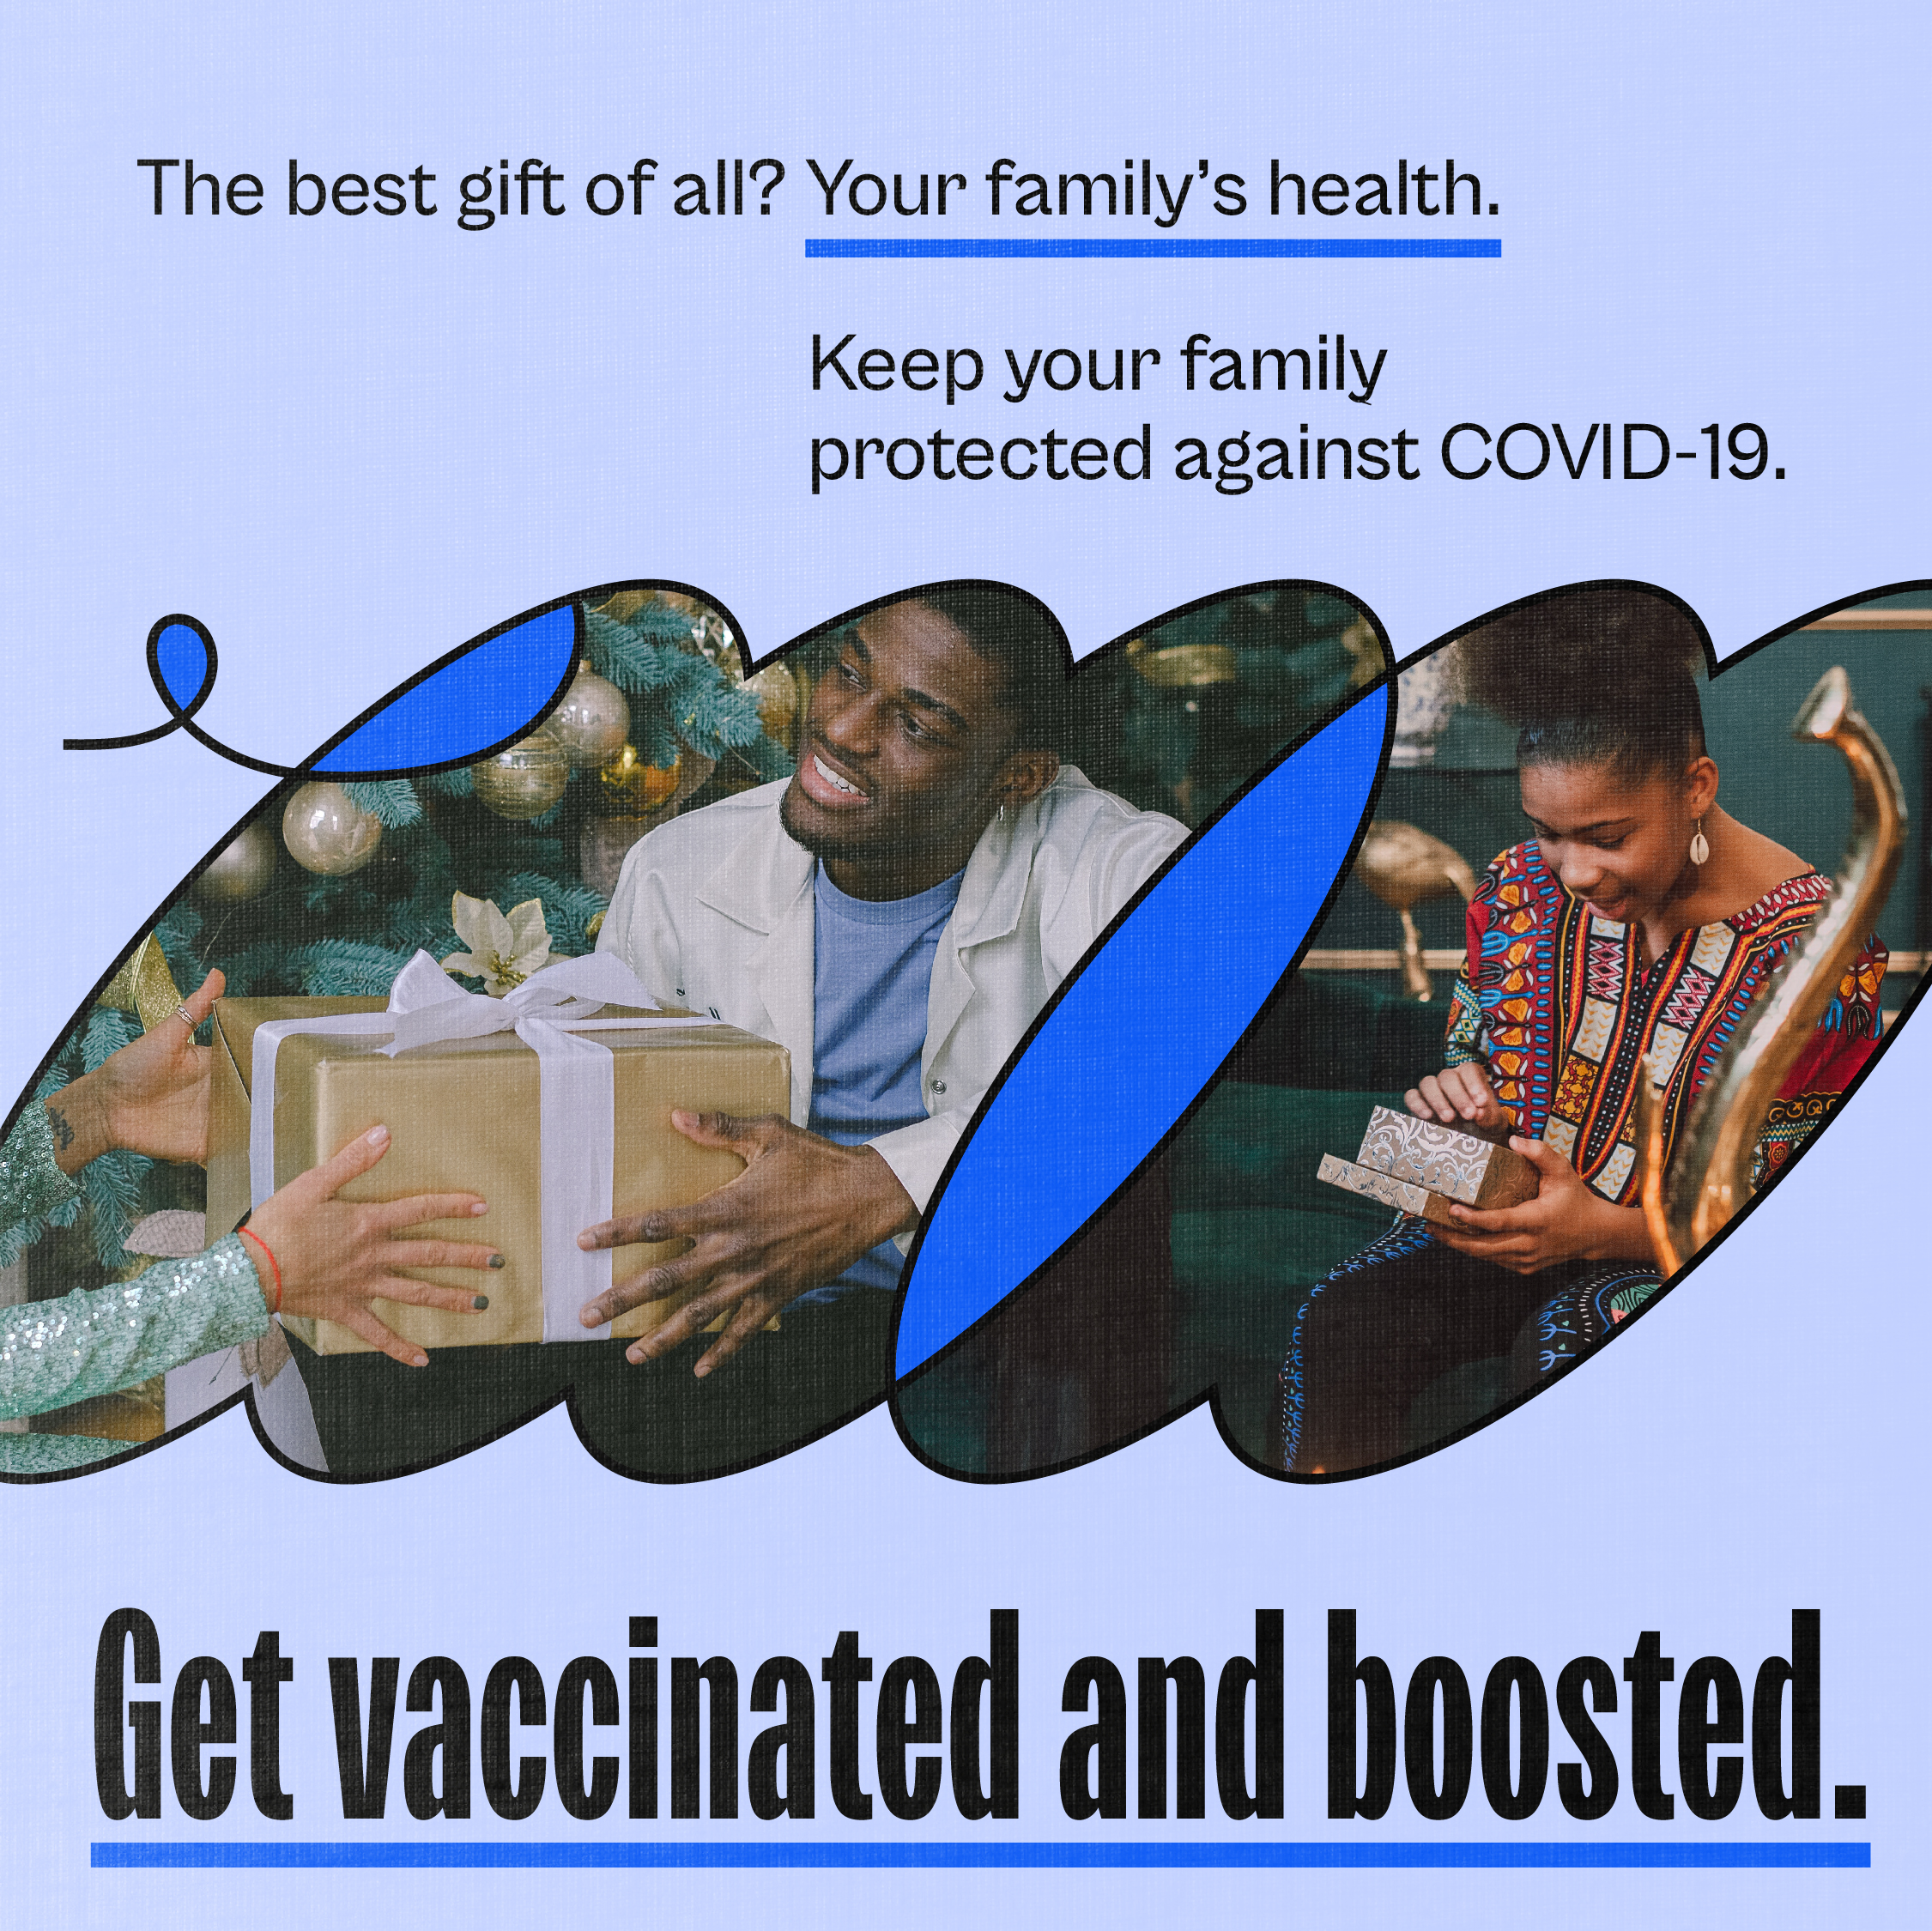 Two images of Black adults (one man, one woman) receiving gifts for the holiday. Text reads, "The best gift of all? Your family’s health. Keep your family protected against COVID-19. Get vaccinated and boosted."